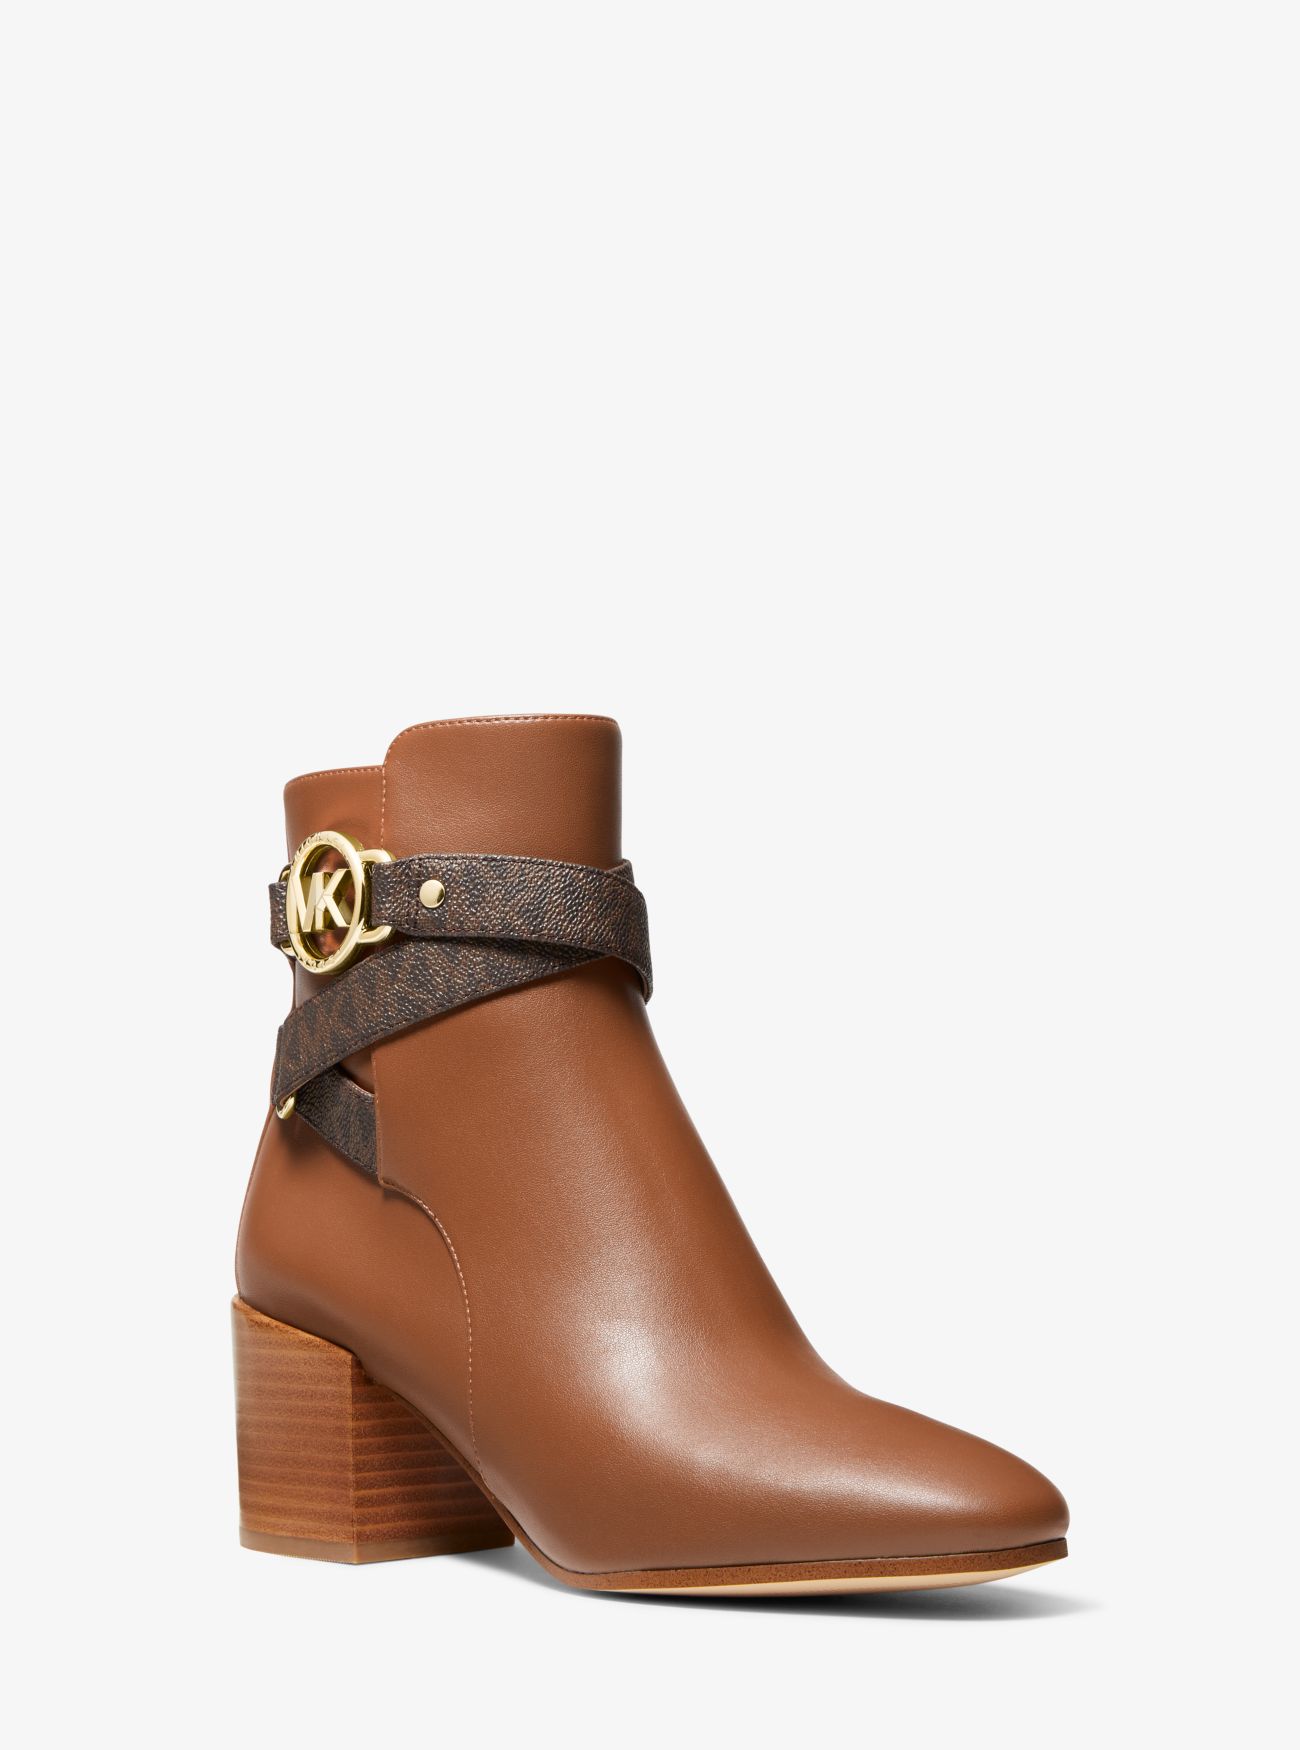 MK Rory Logo Trim Ankle Boot - Luggage Brown - Michael Kors